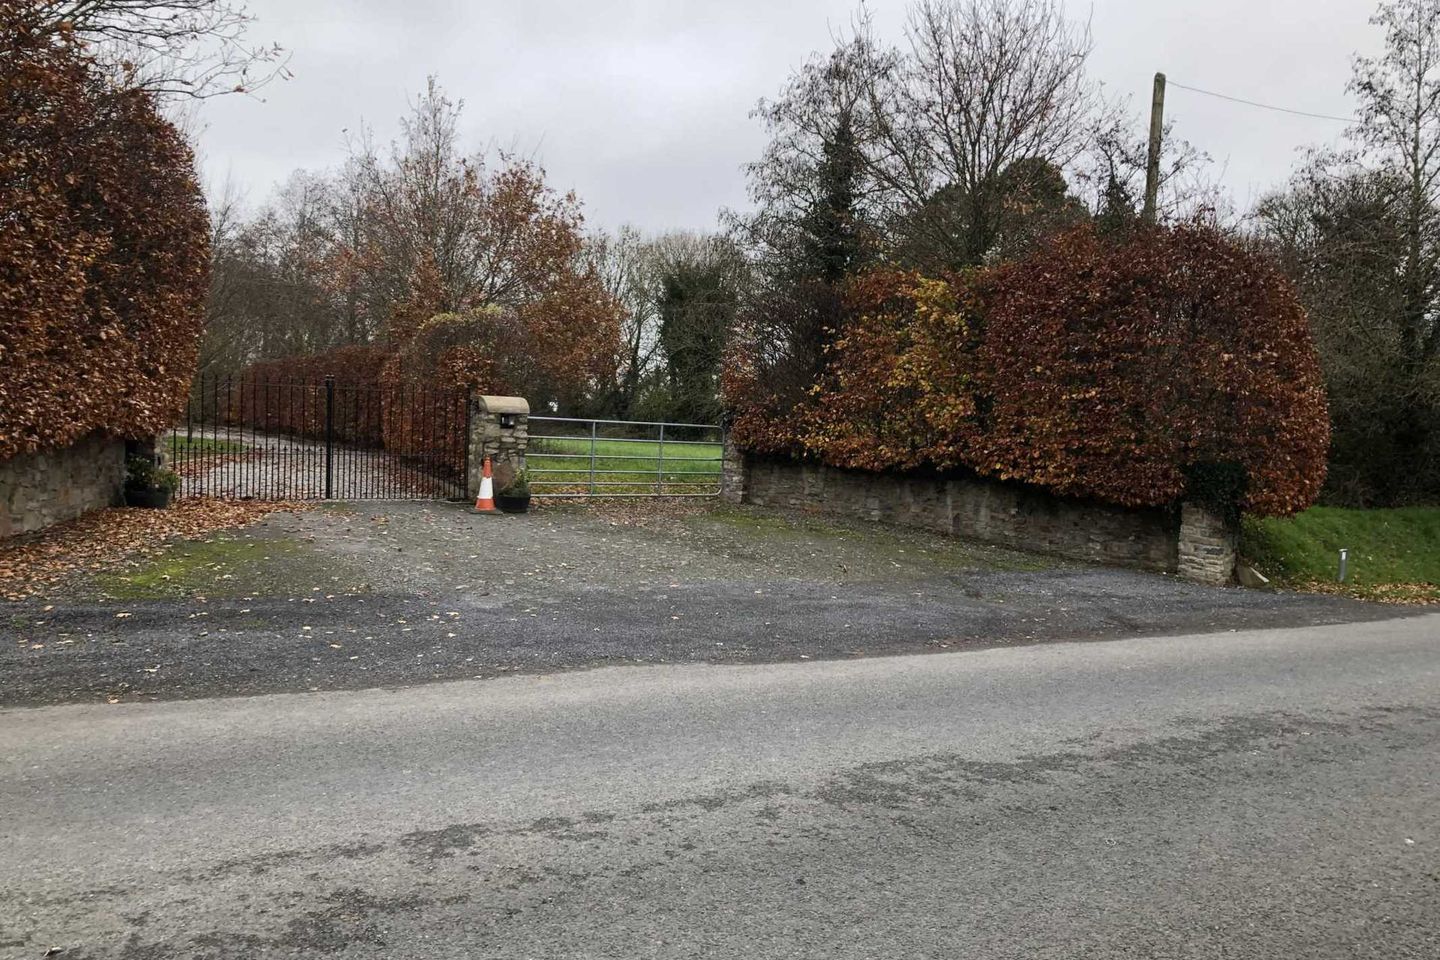 Poulacapple East, Mullinahone, Co. Tipperary